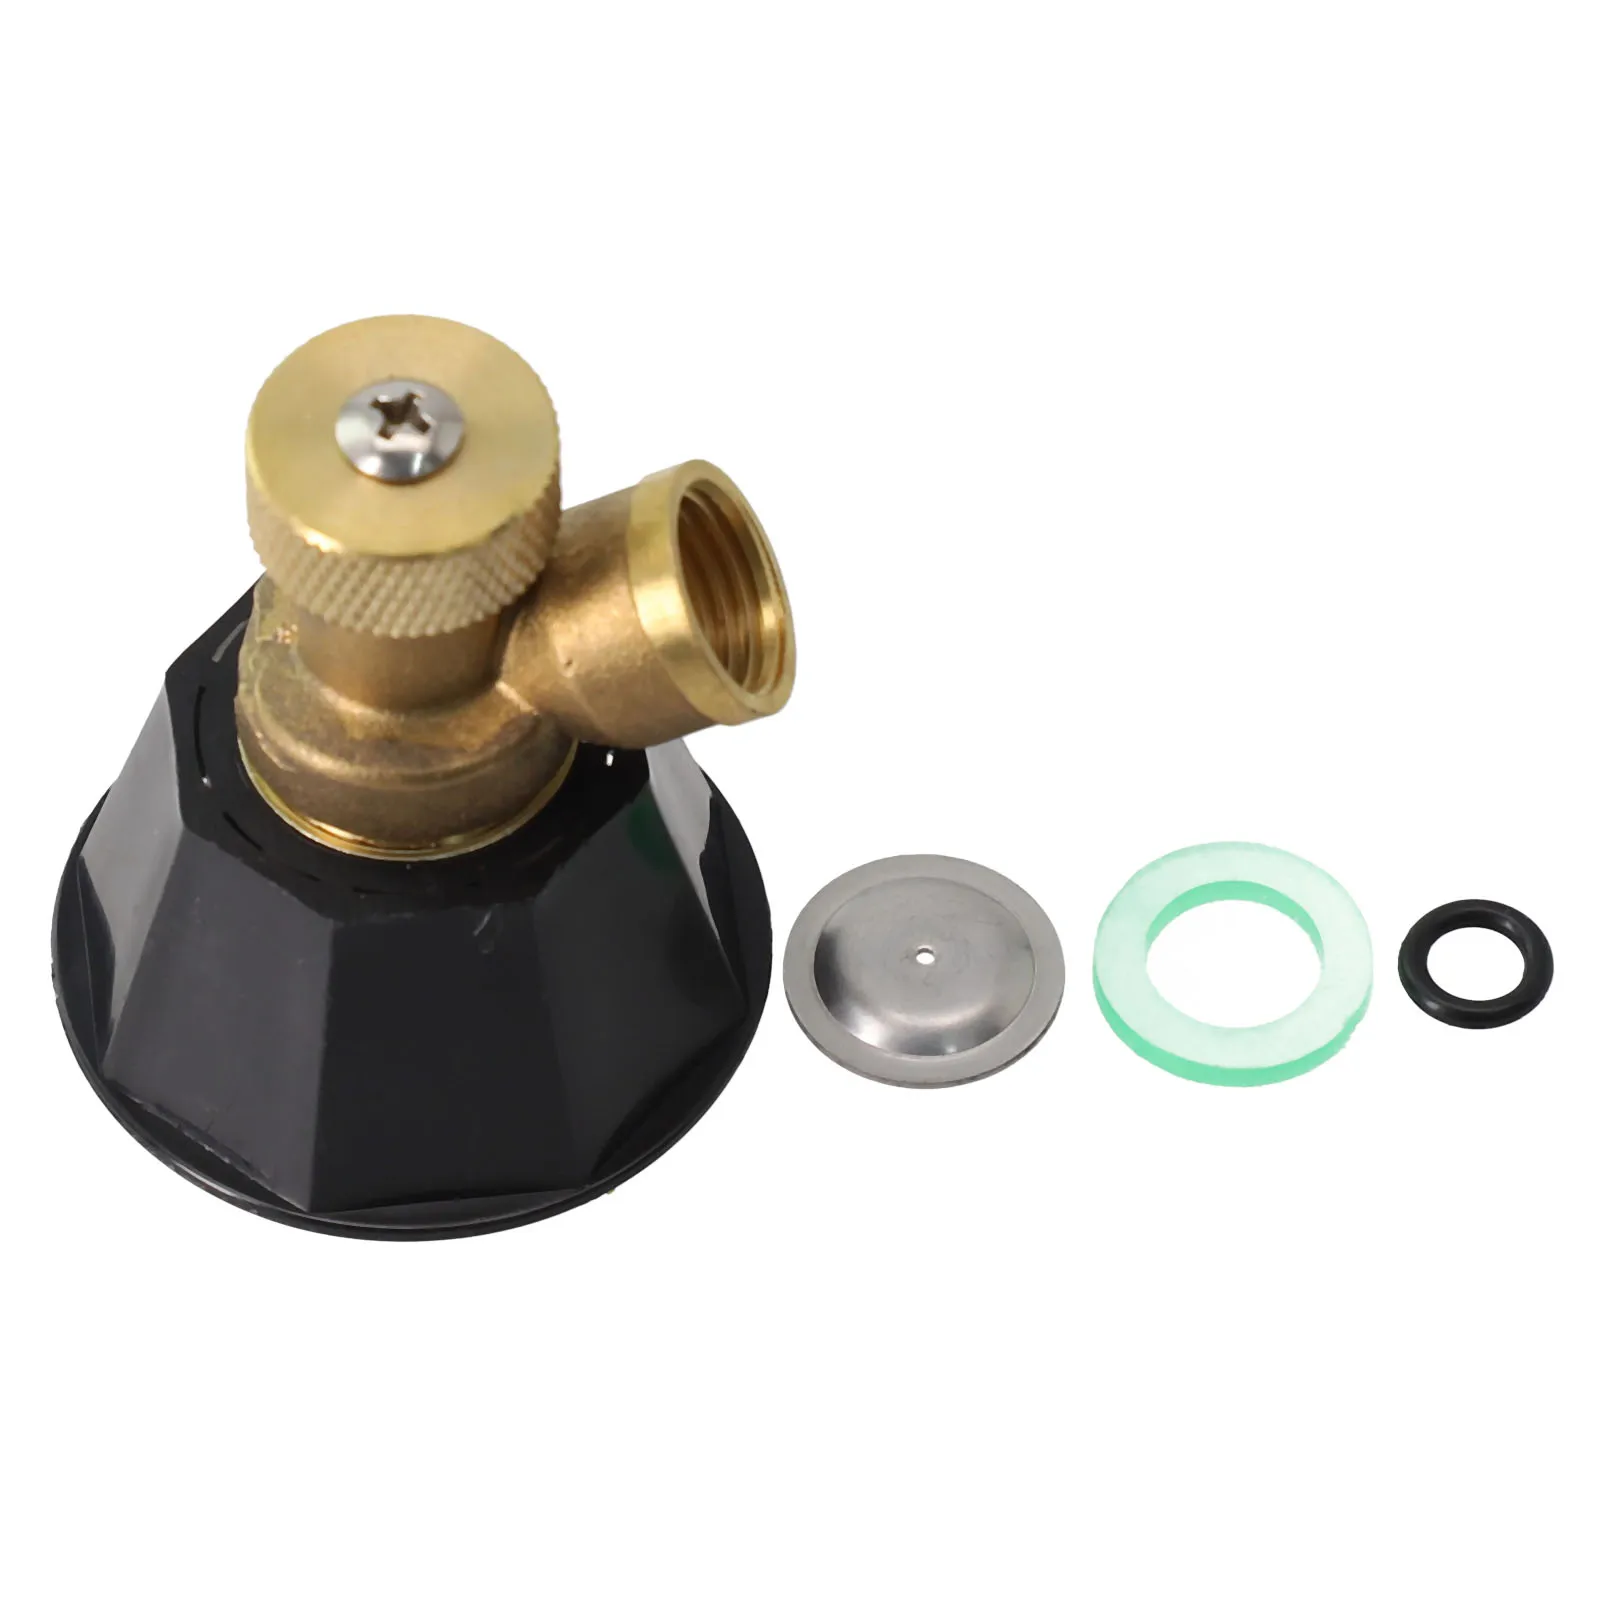 

Anti-Corrosion Spray Nozzle Cyclone Nozzle Multiple Modes Garden Copper Black Whirlwind Sprinkler Head 5.5*4.6cm Easy To Install